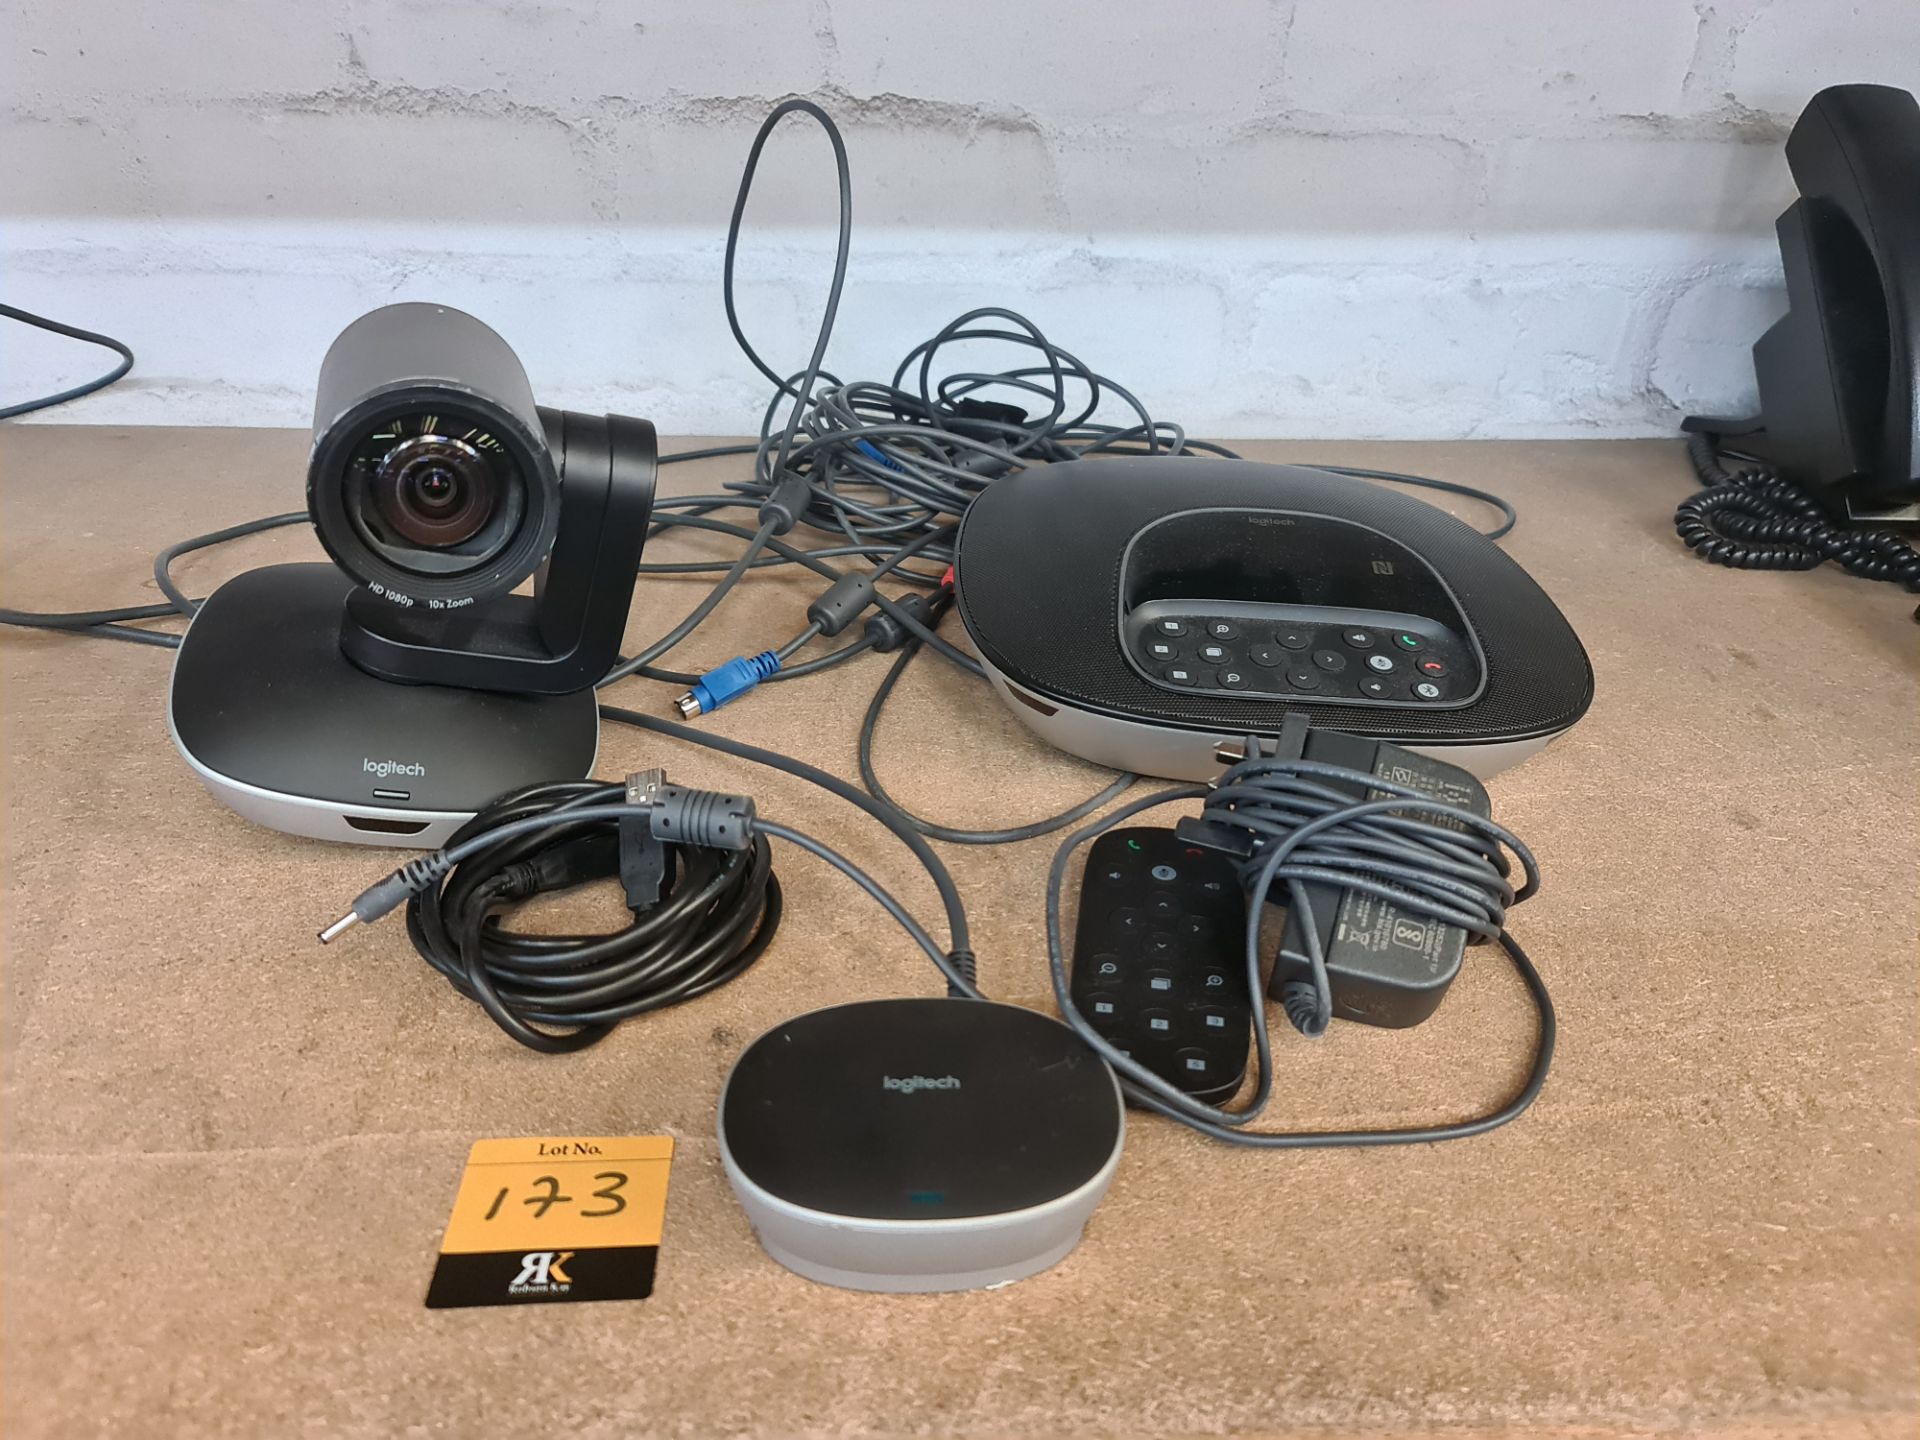 Logitech video conferencing system comprising base station, camera, remote control, powerpack & what